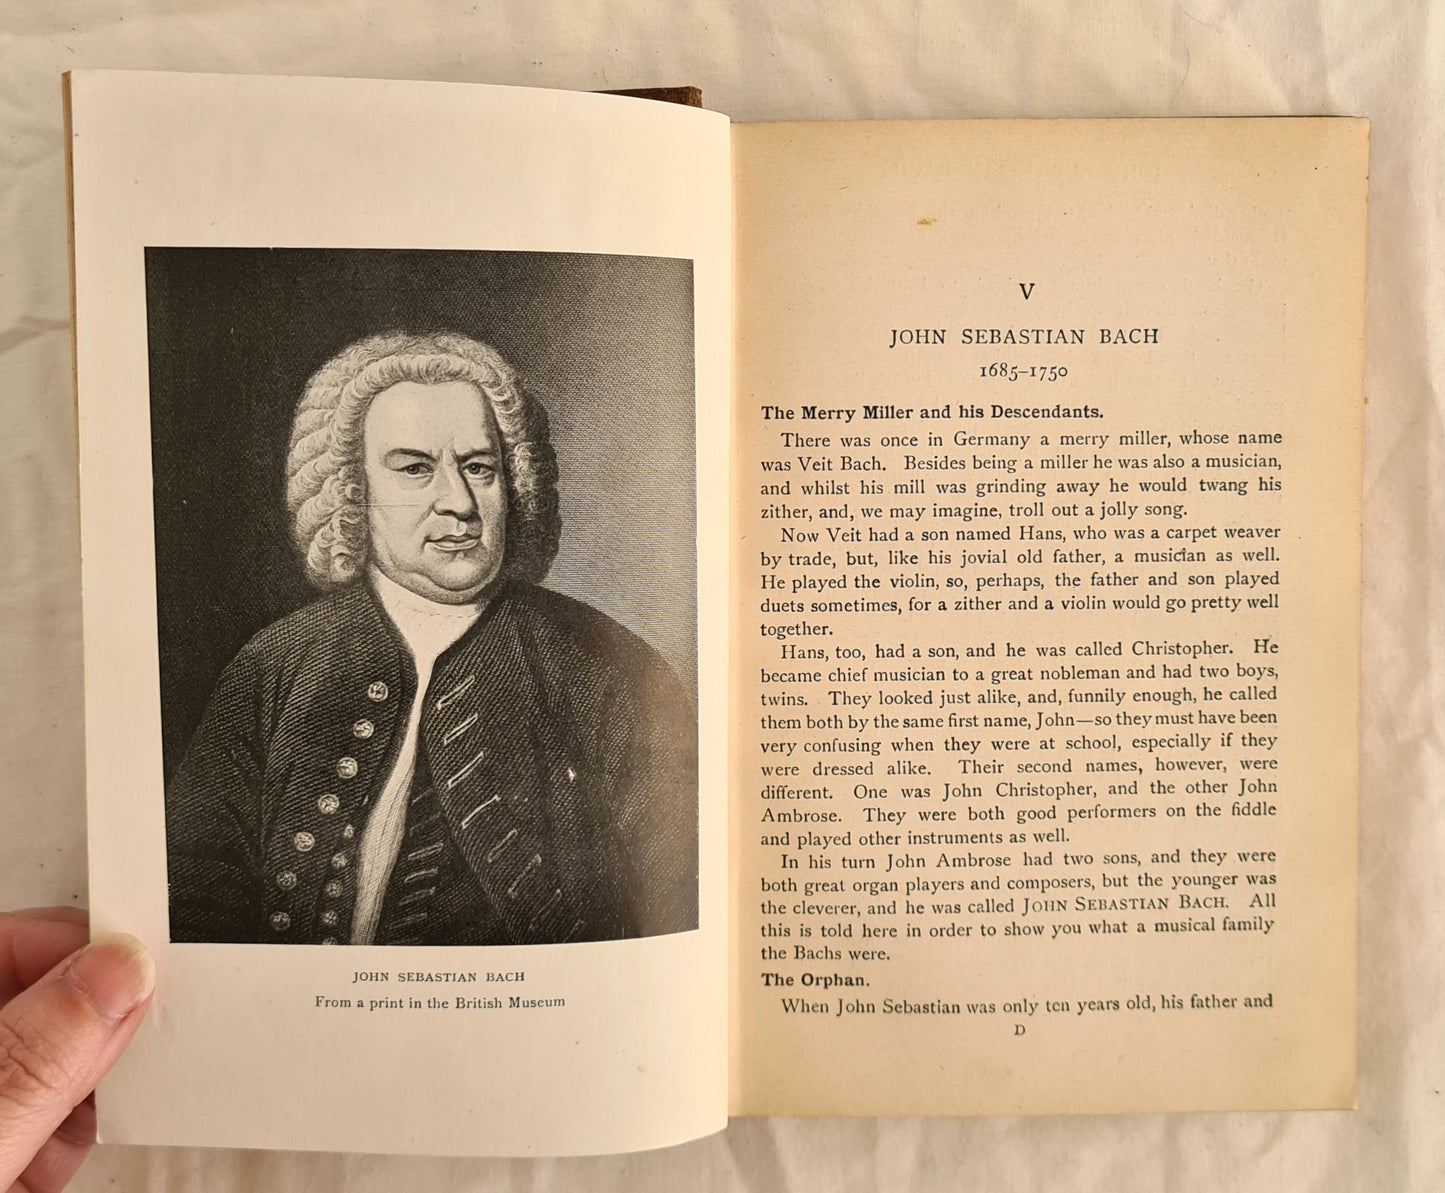 The Complete Book of the Great Musicians by Percy A. Scholes